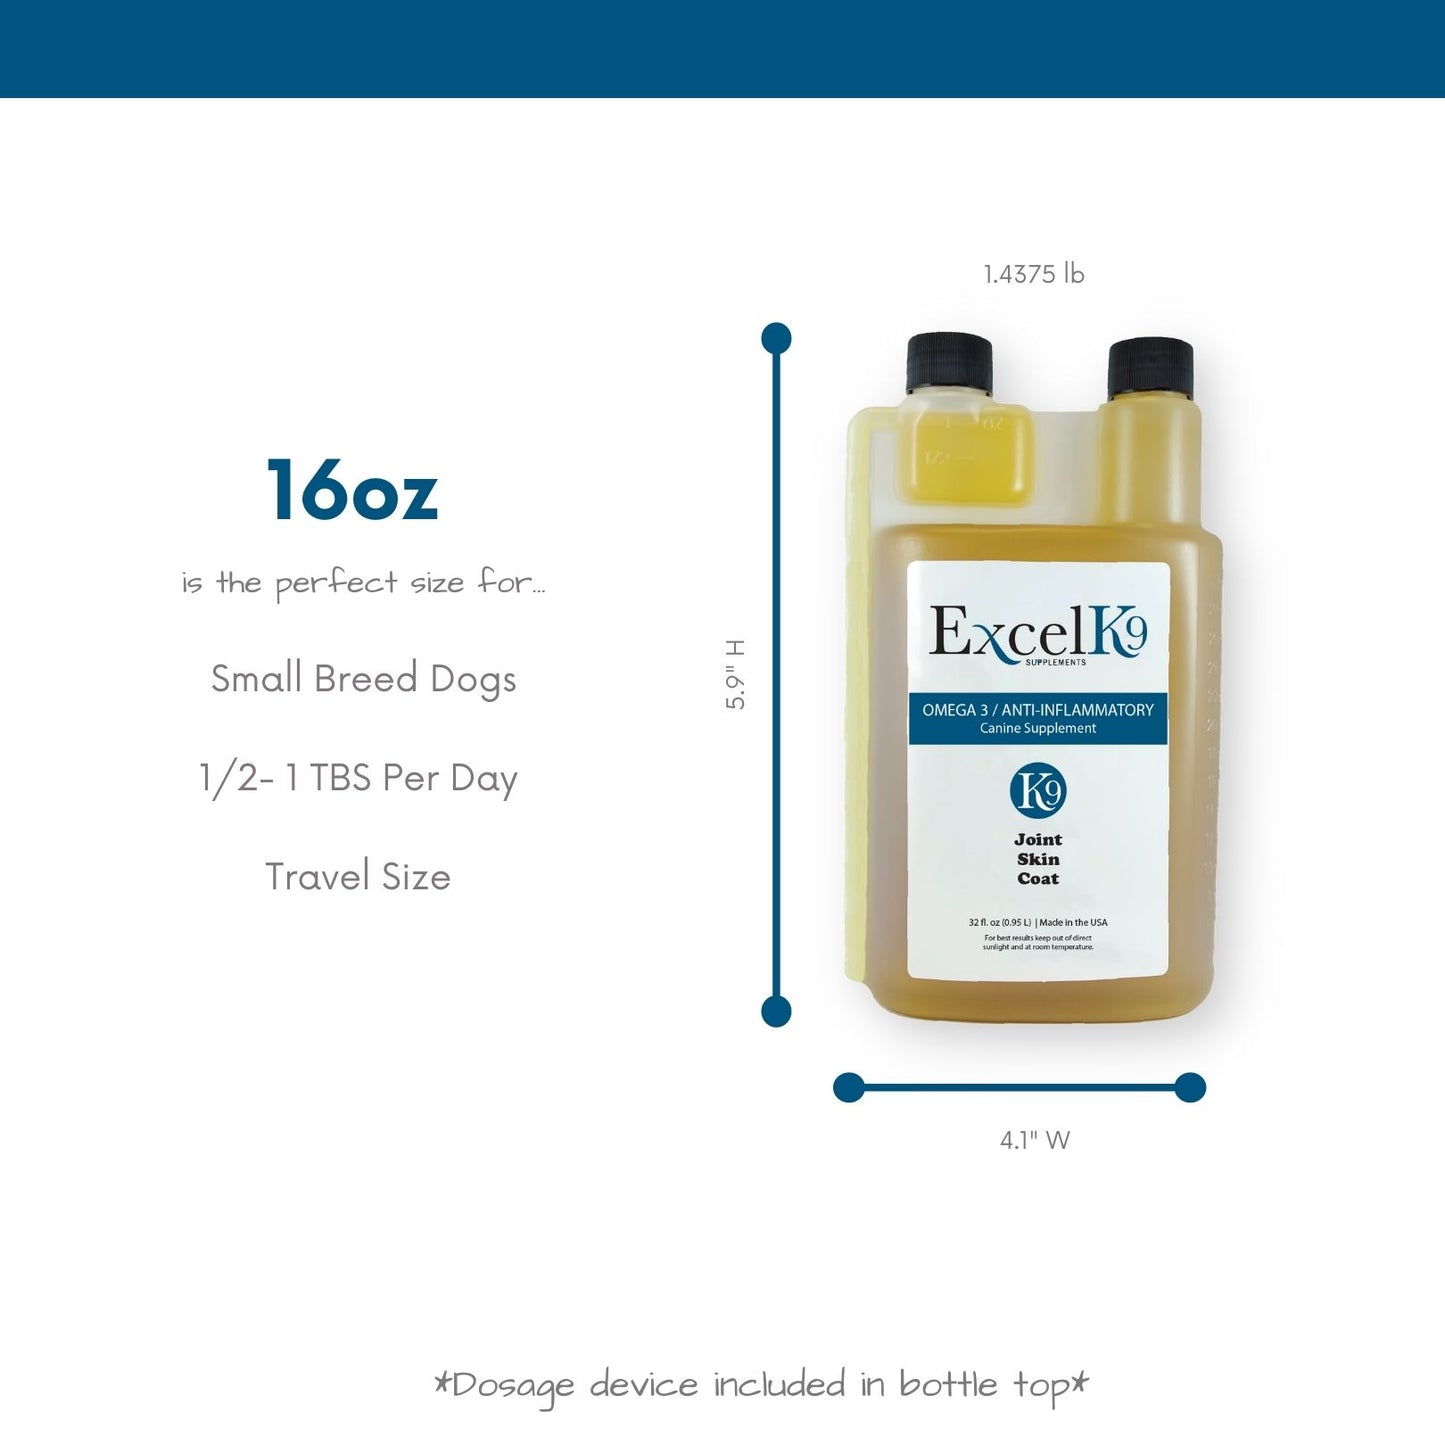 ExcelK9 Canine Supplement